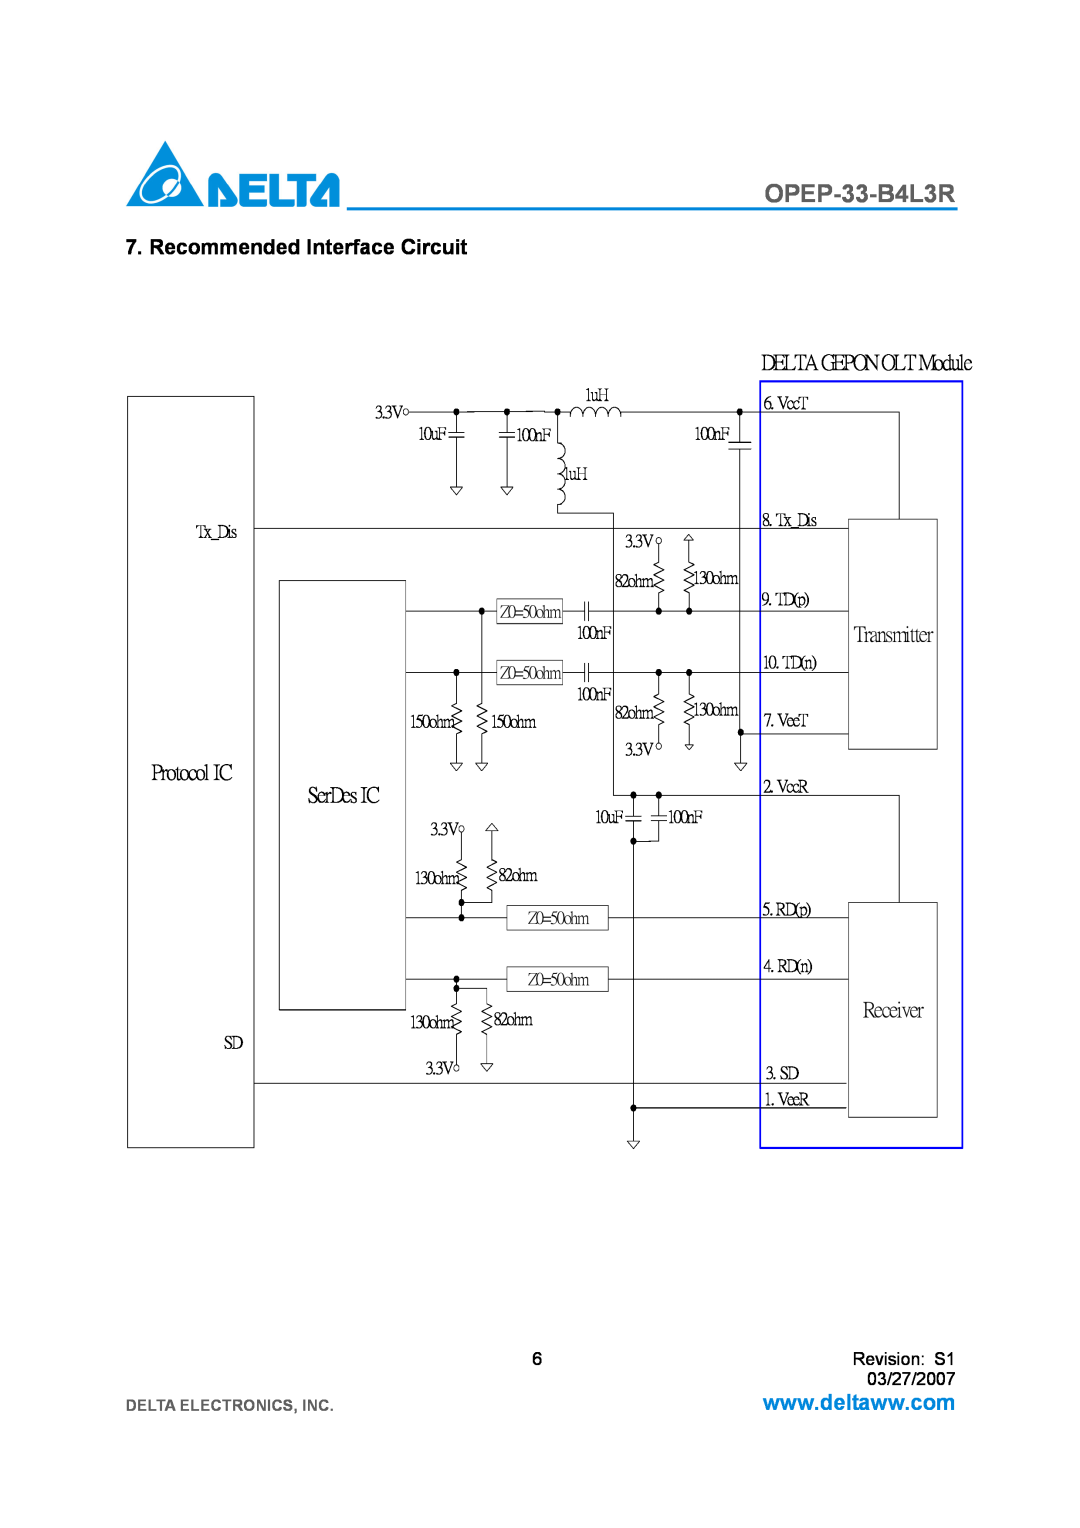 Delta Electronics OPEP-33-B4L3R manual Recommended Interface Circuit, Transmitter, Protocol IC, SerDes IC, Receiver 